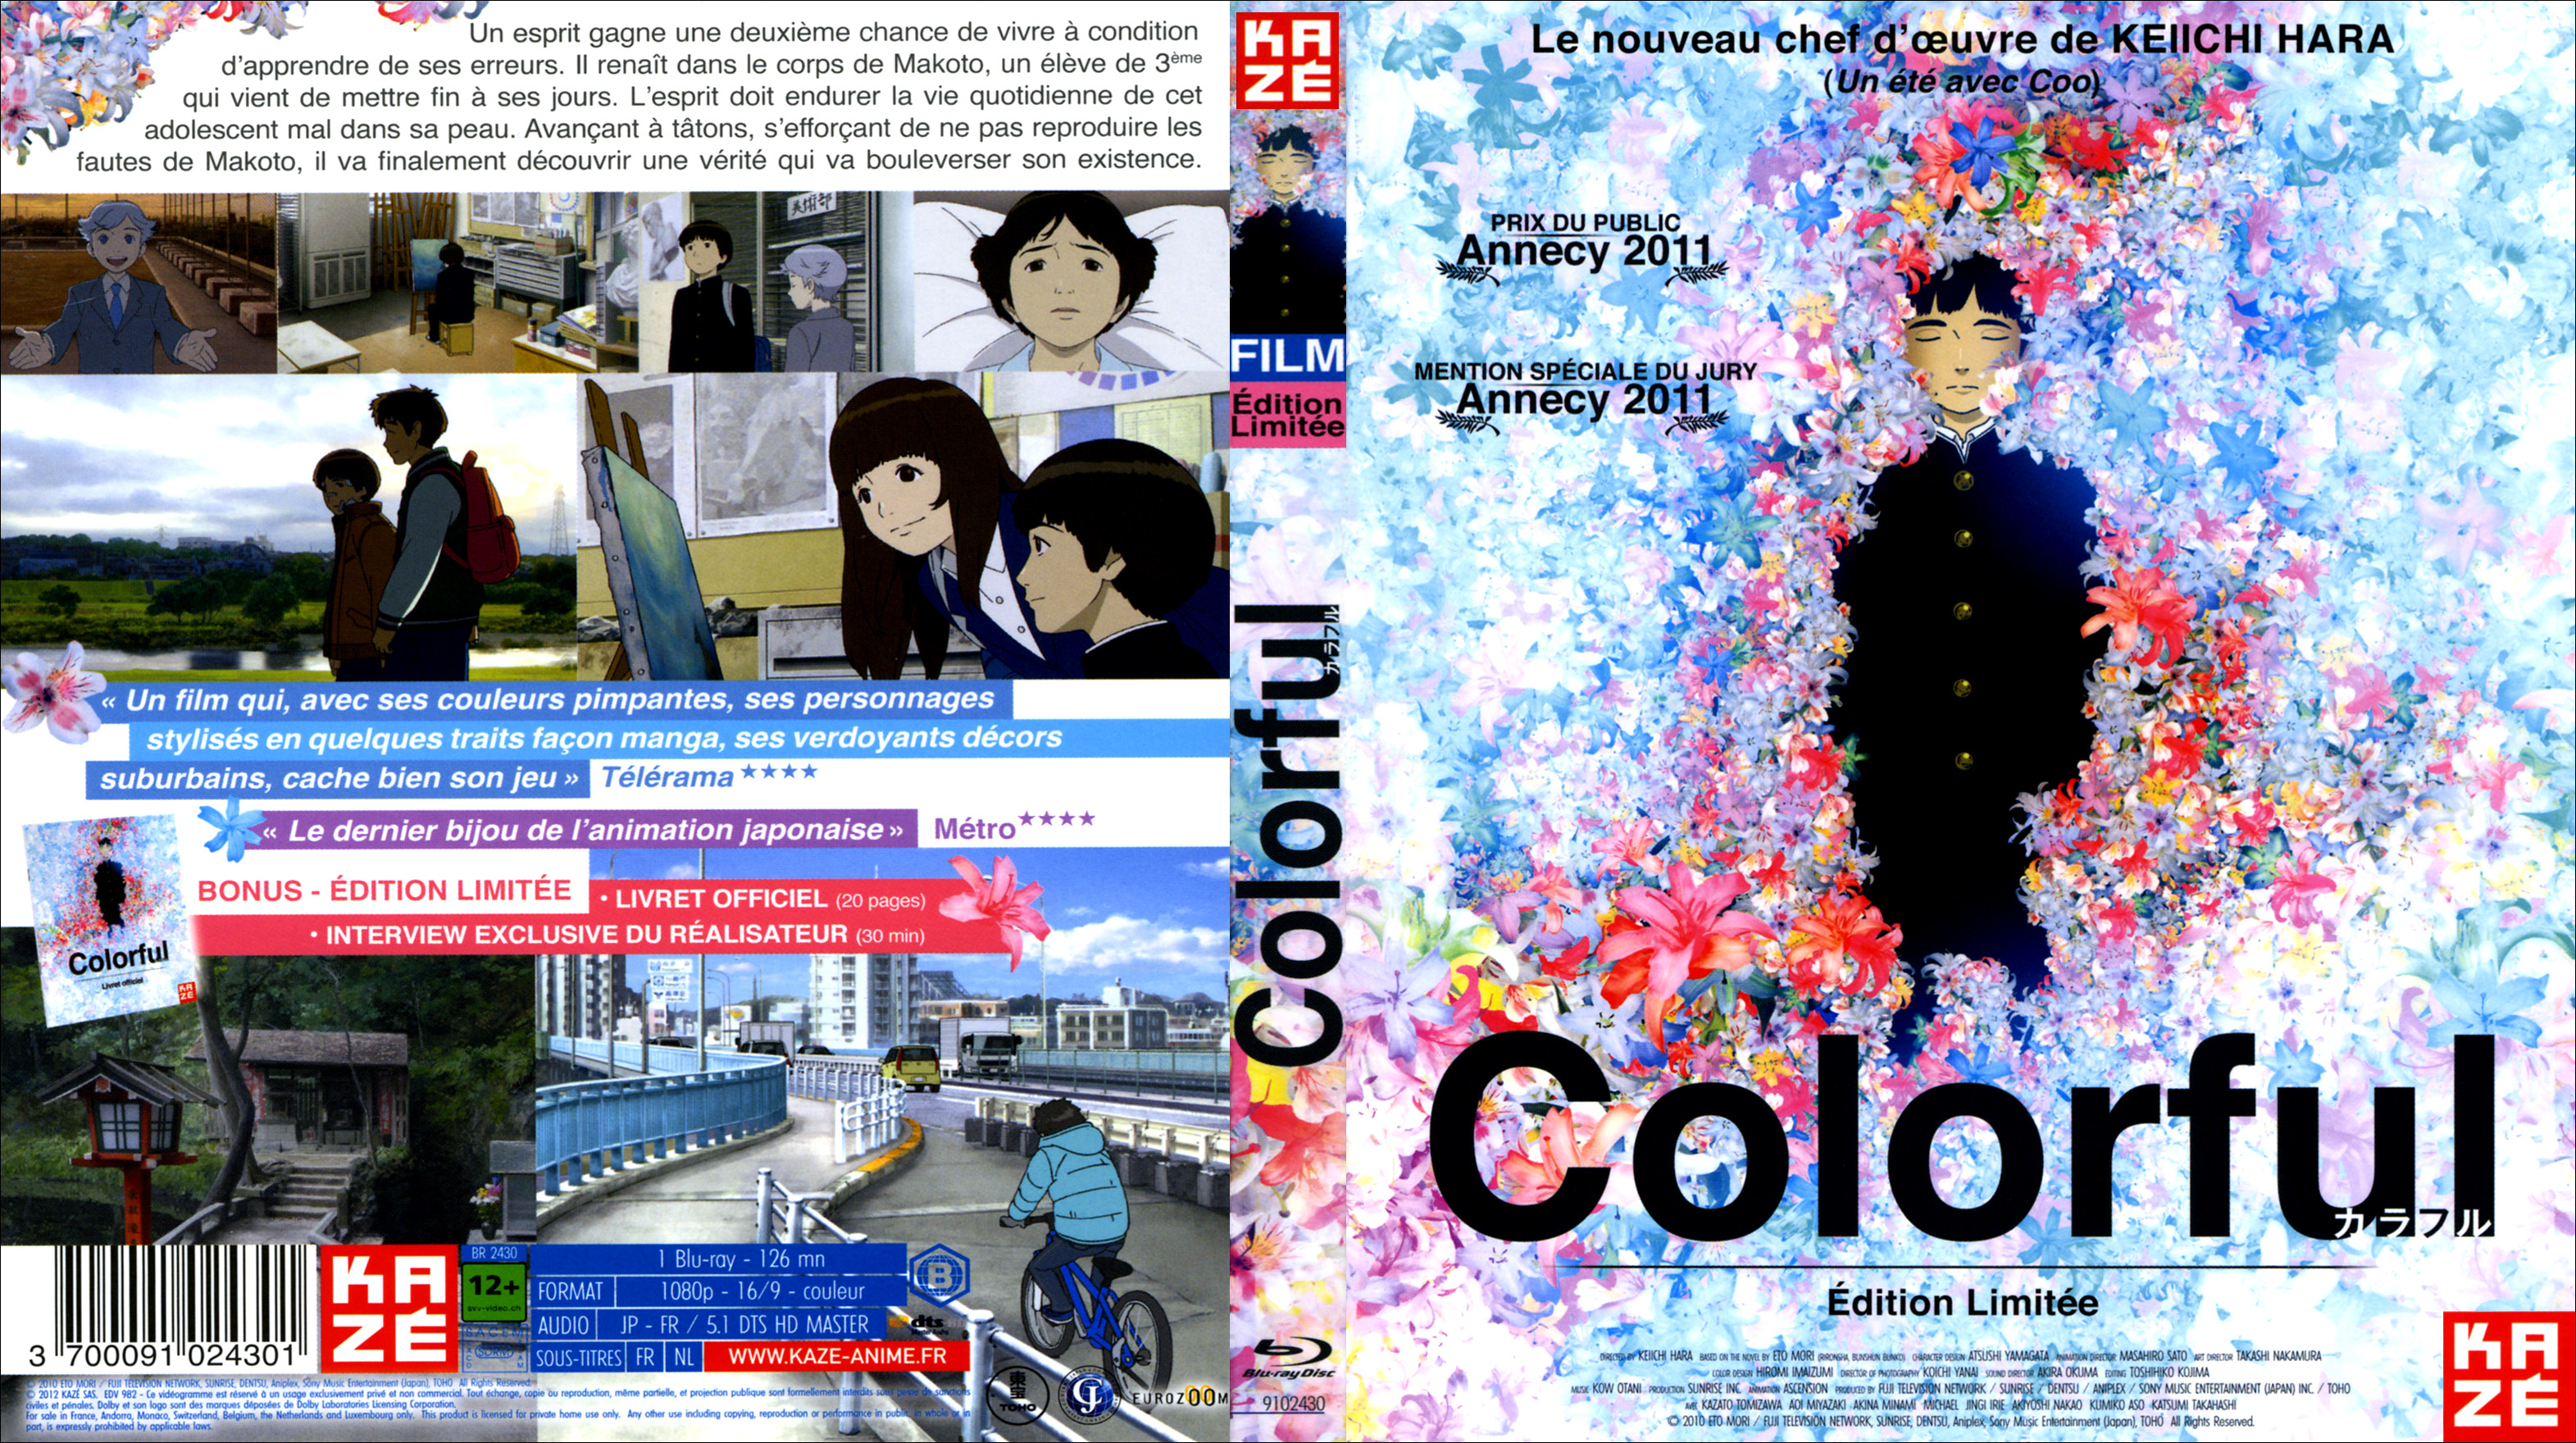 Jaquette DVD Colorful (BLU-RAY)